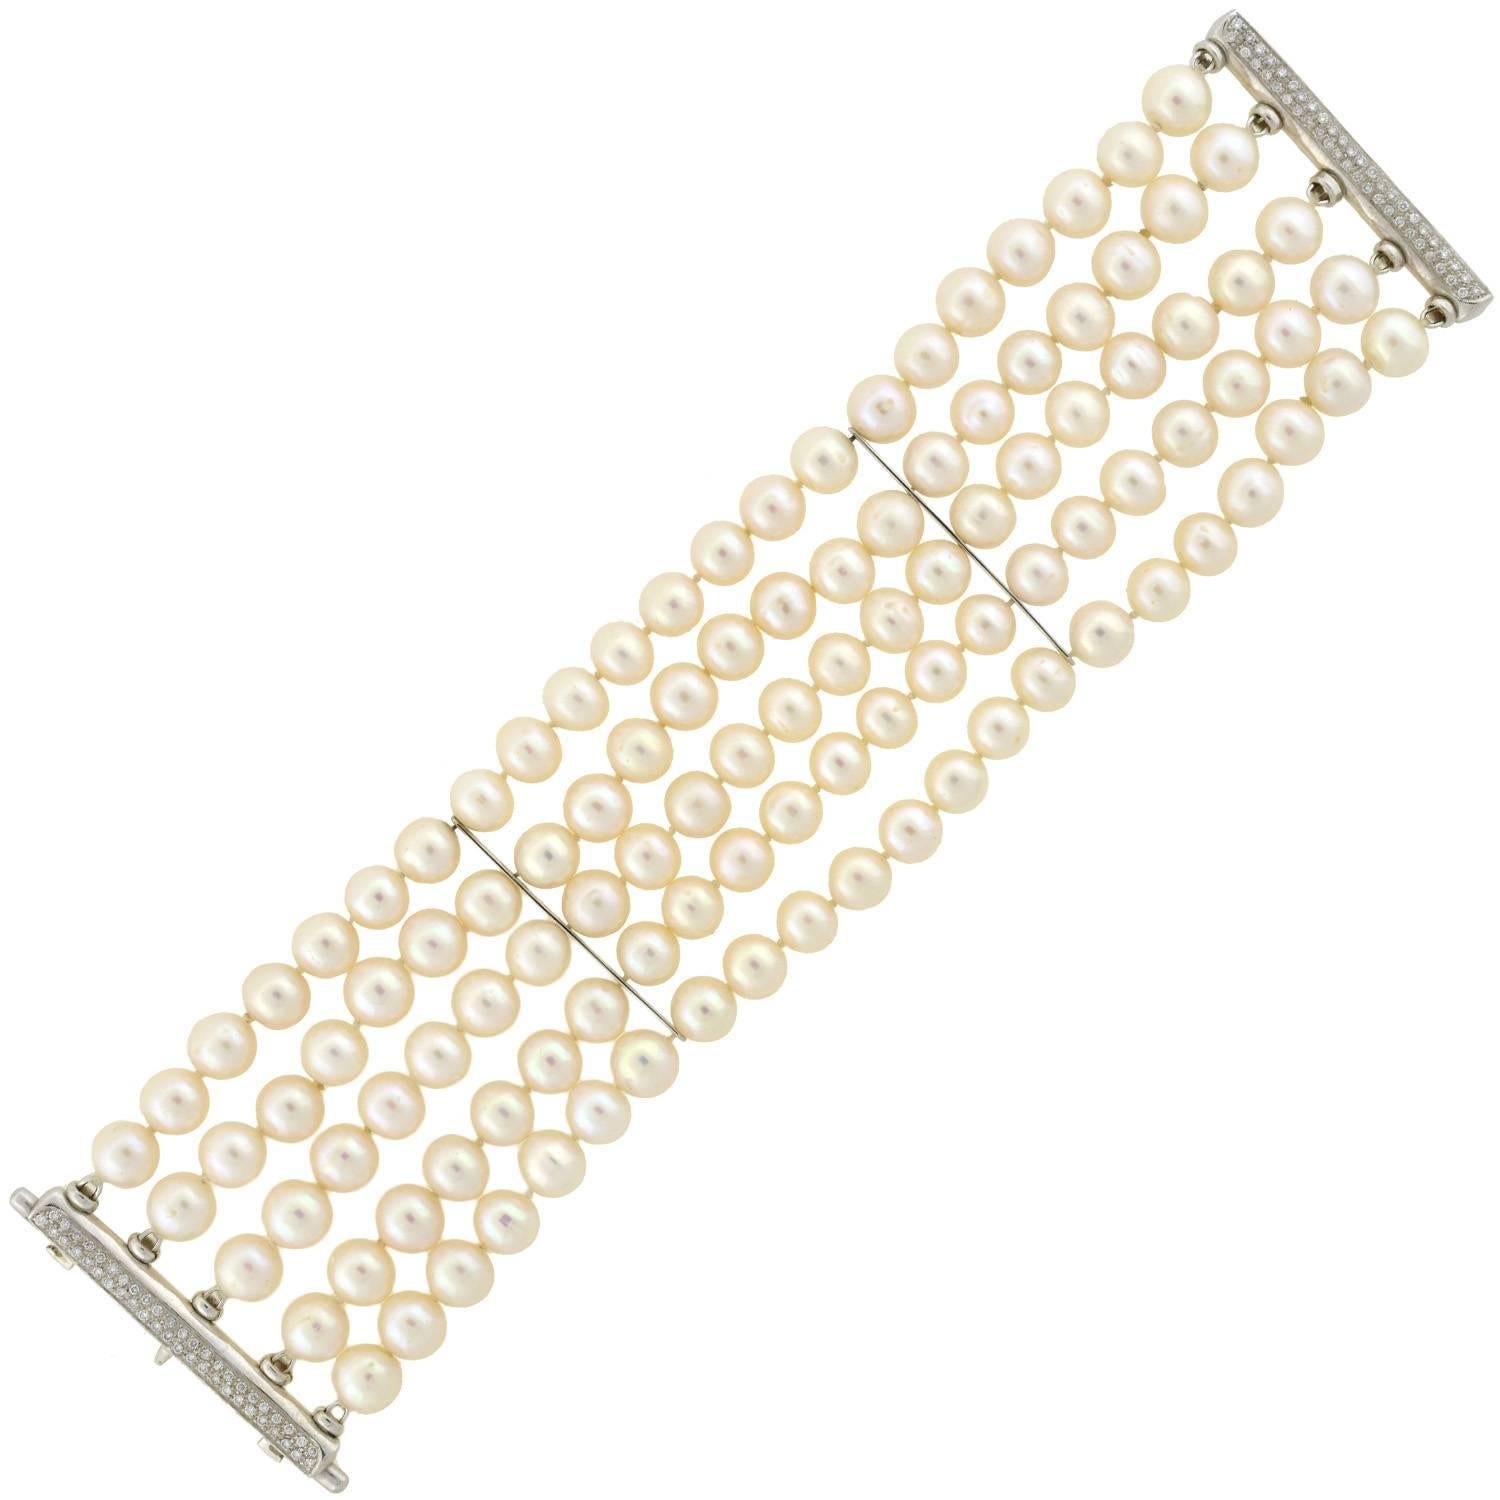 A gorgeous Estate pearl and diamond bracelet! This stunning piece is comprised of 5 strands of delicate cultured pearls, which have a rich creamy color and beautiful luster. Two 18kt white gold bar links separate the strands of pearls in the middle,